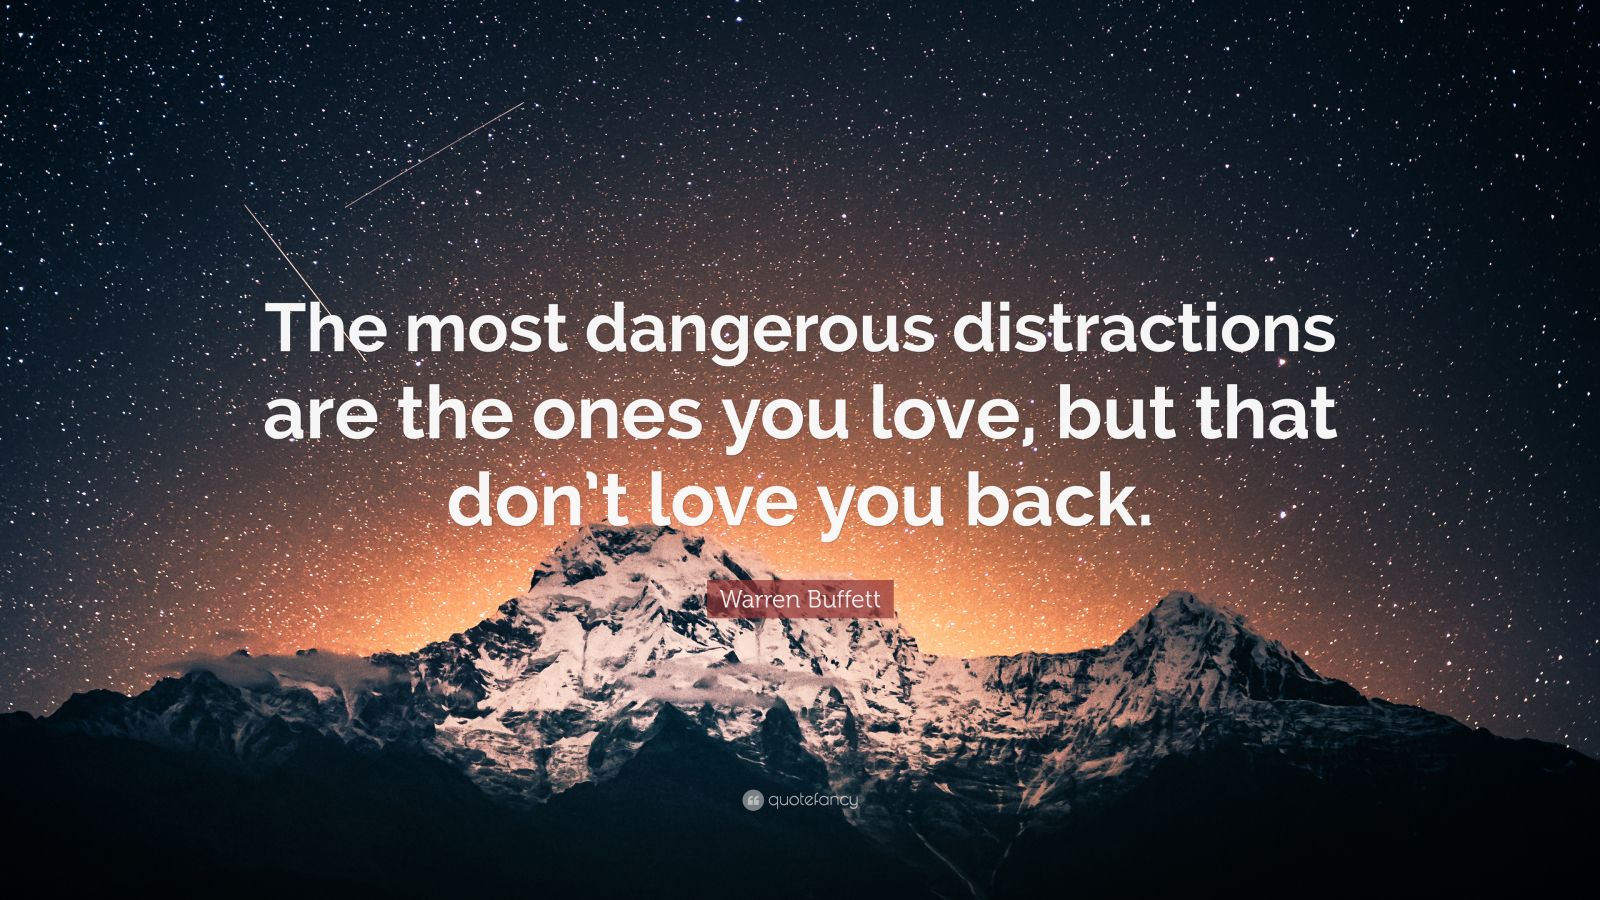 Warren Buffett Quote: "The most dangerous distractions are the ones you love, but that don't ...